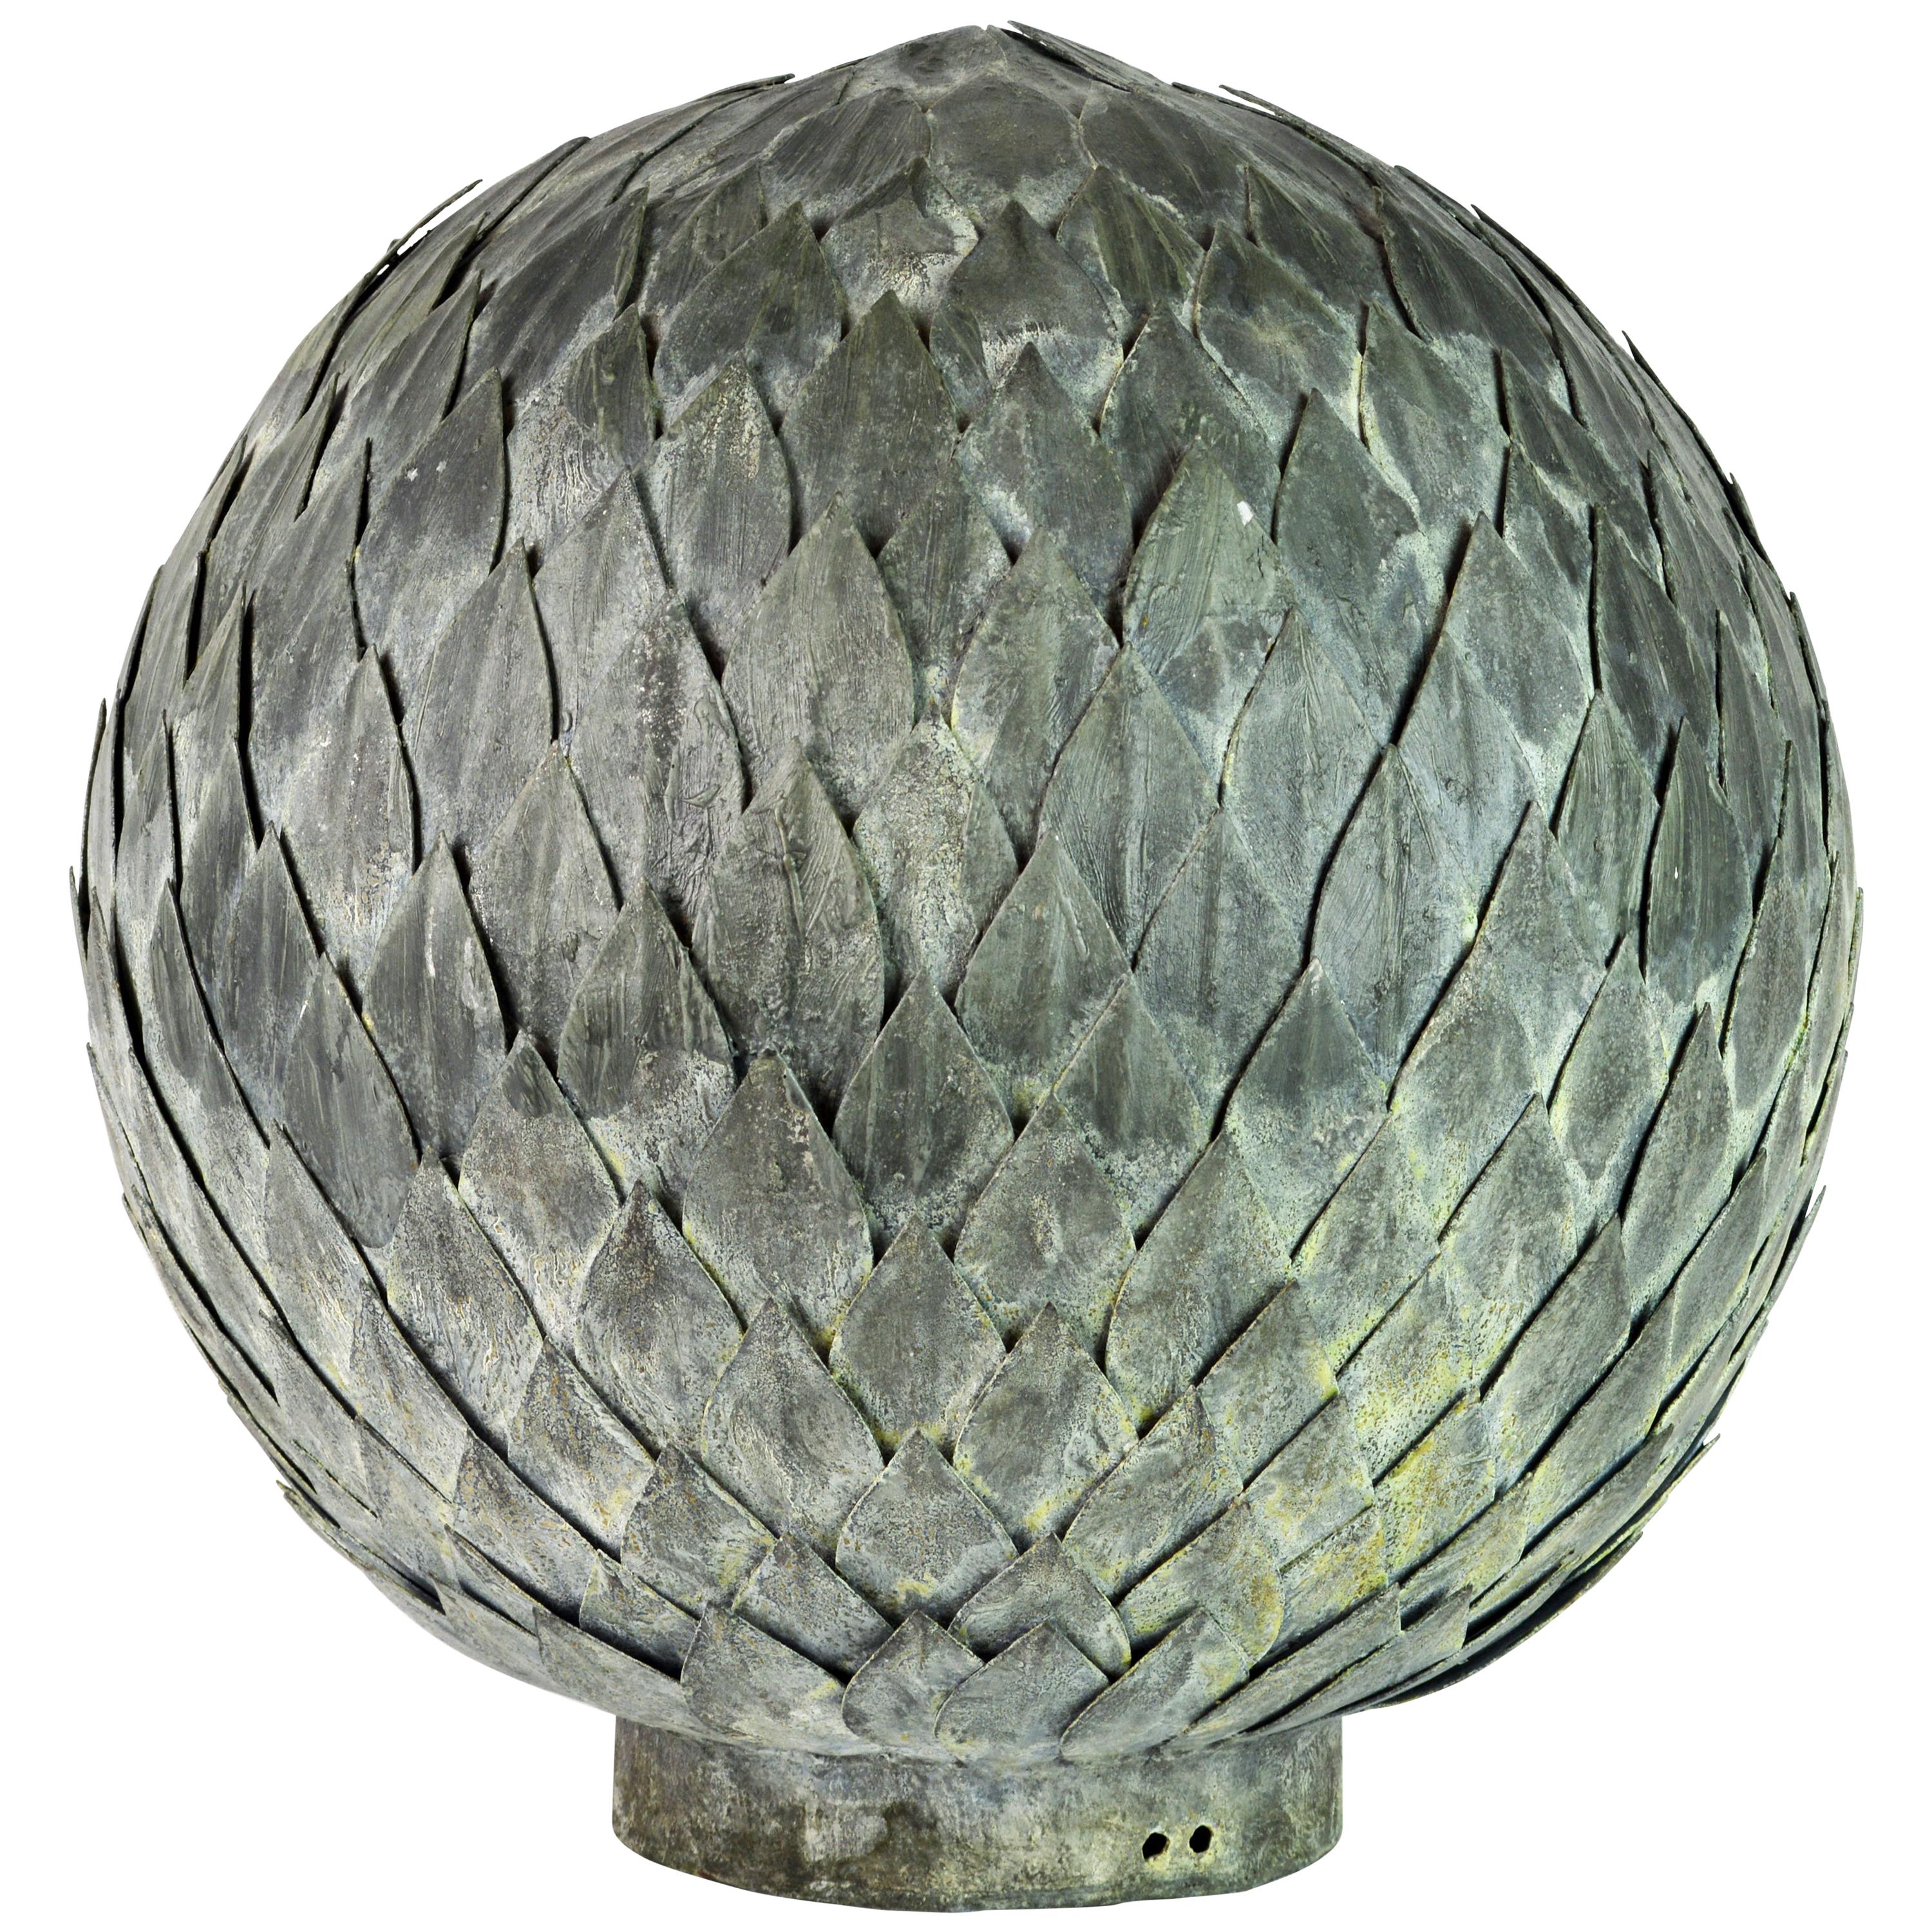 Decorative Welded and Patinated Metal Laurel Leaf Ball or Fountain Head